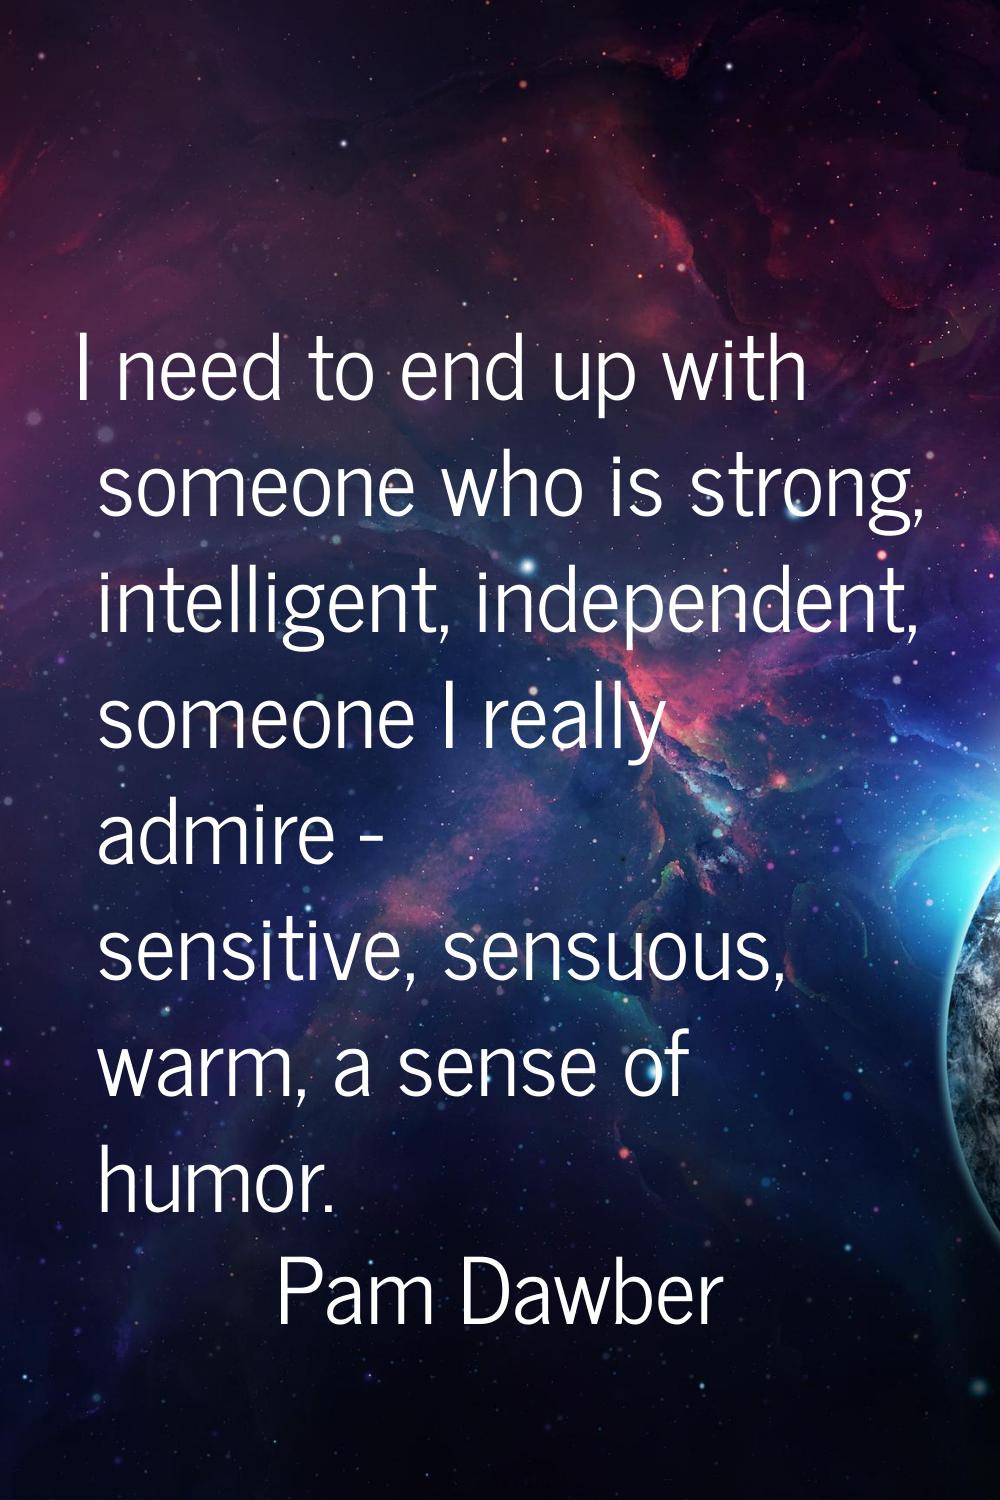 I need to end up with someone who is strong, intelligent, independent, someone I really admire - se